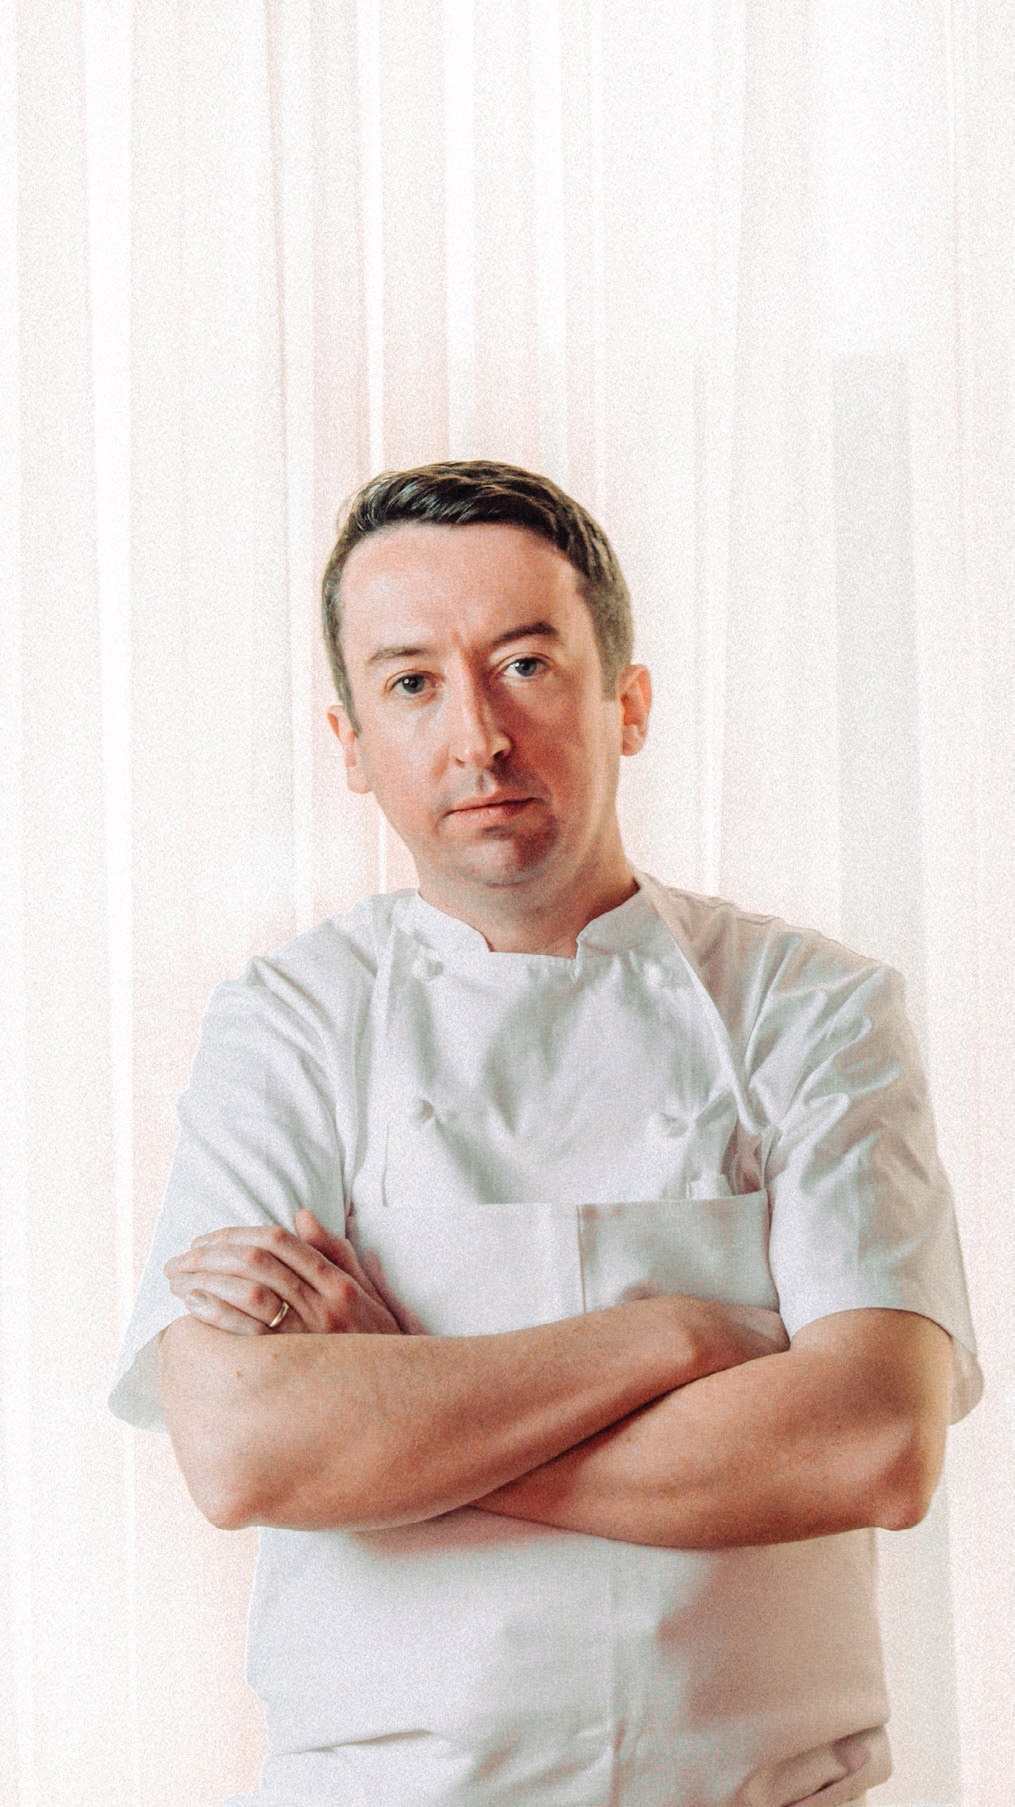 Chef Aidan McGee hails from County Donegal, Ireland. PHOTO: BY CANDICE CONNER CREATIVE